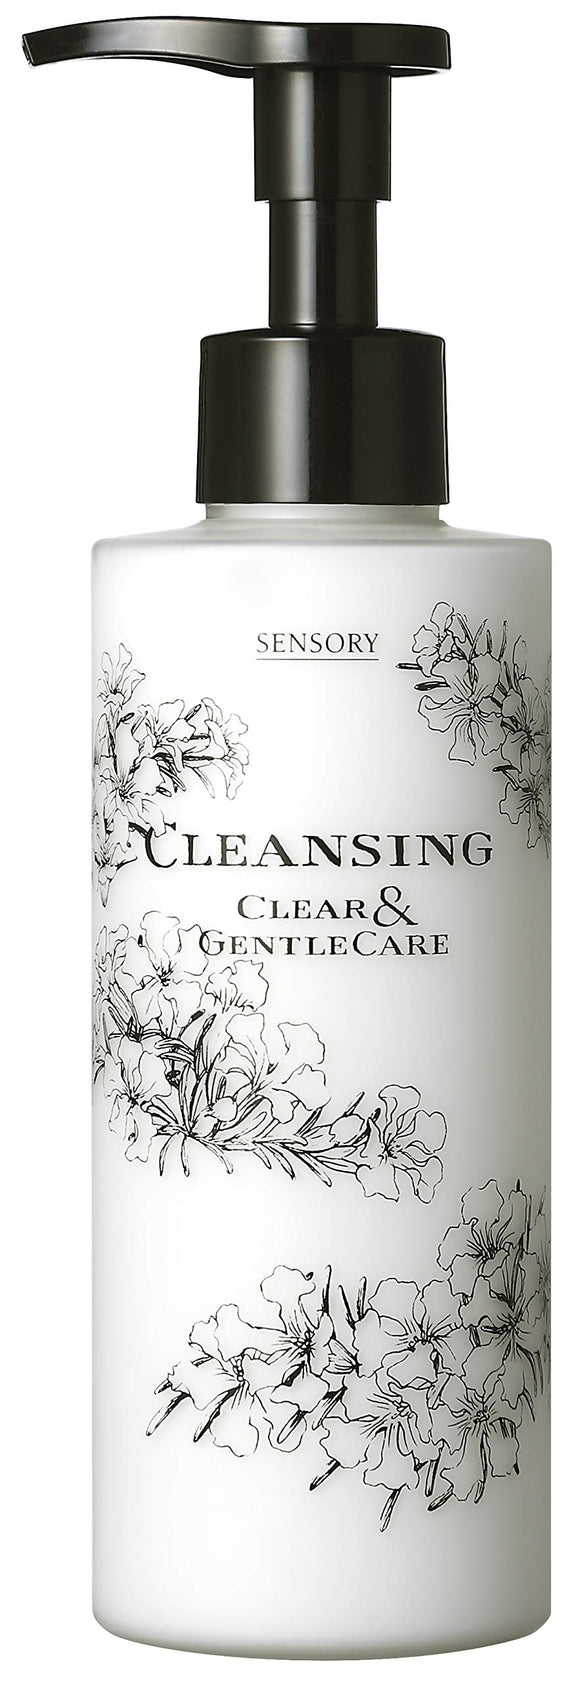 SENSORY Clear & Gentle Care Cleansing